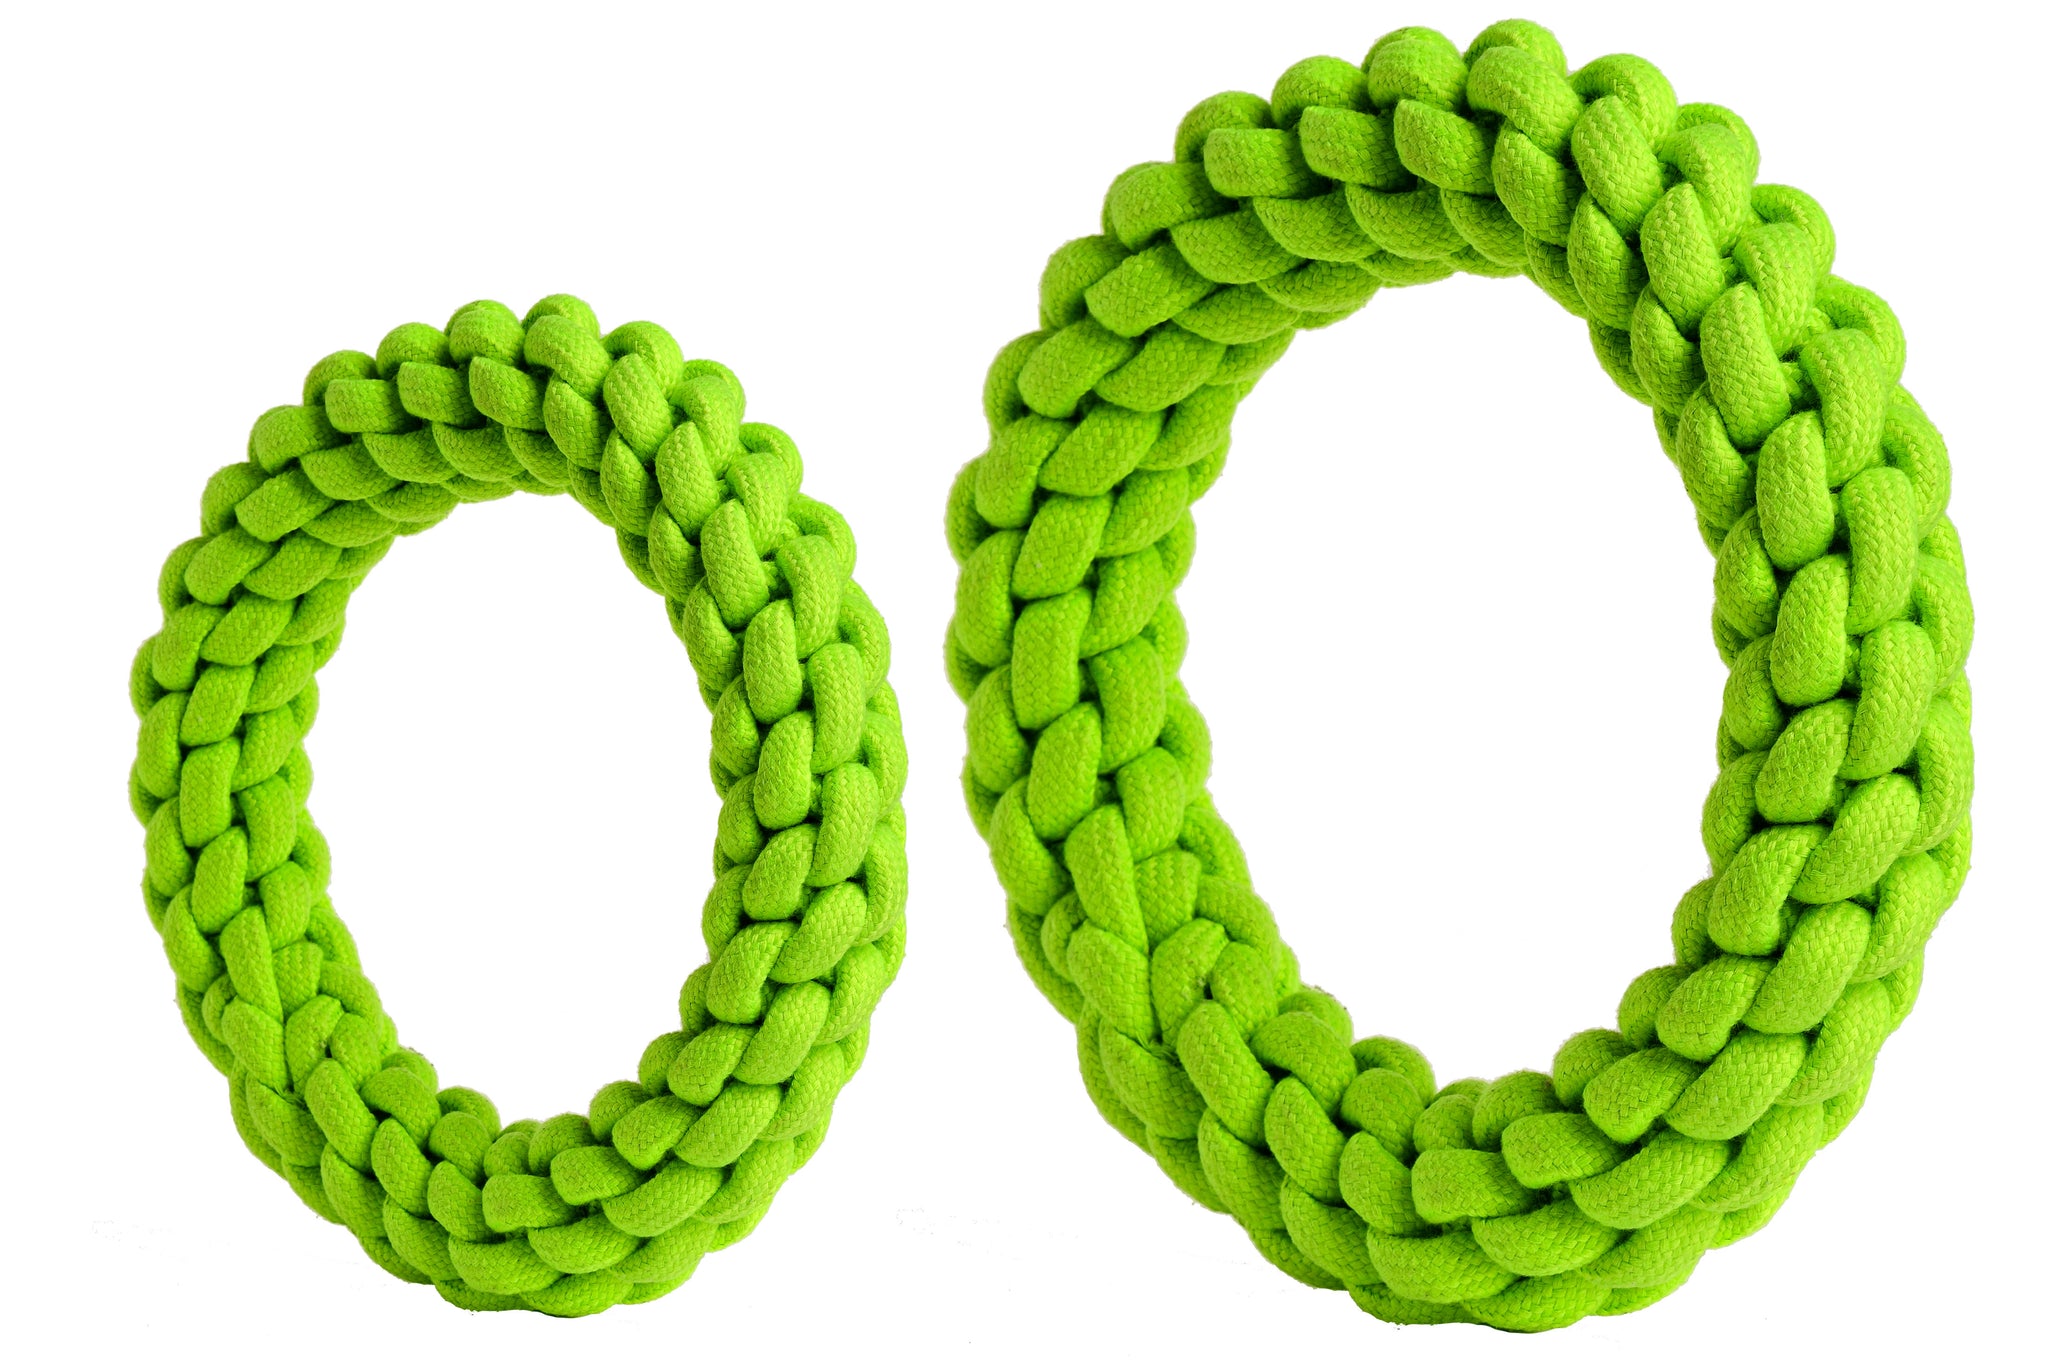 RompiDogz Big & Small Tug N' Toss Rope - 2pc Kit (SOLD OUT!) – RompiCatz